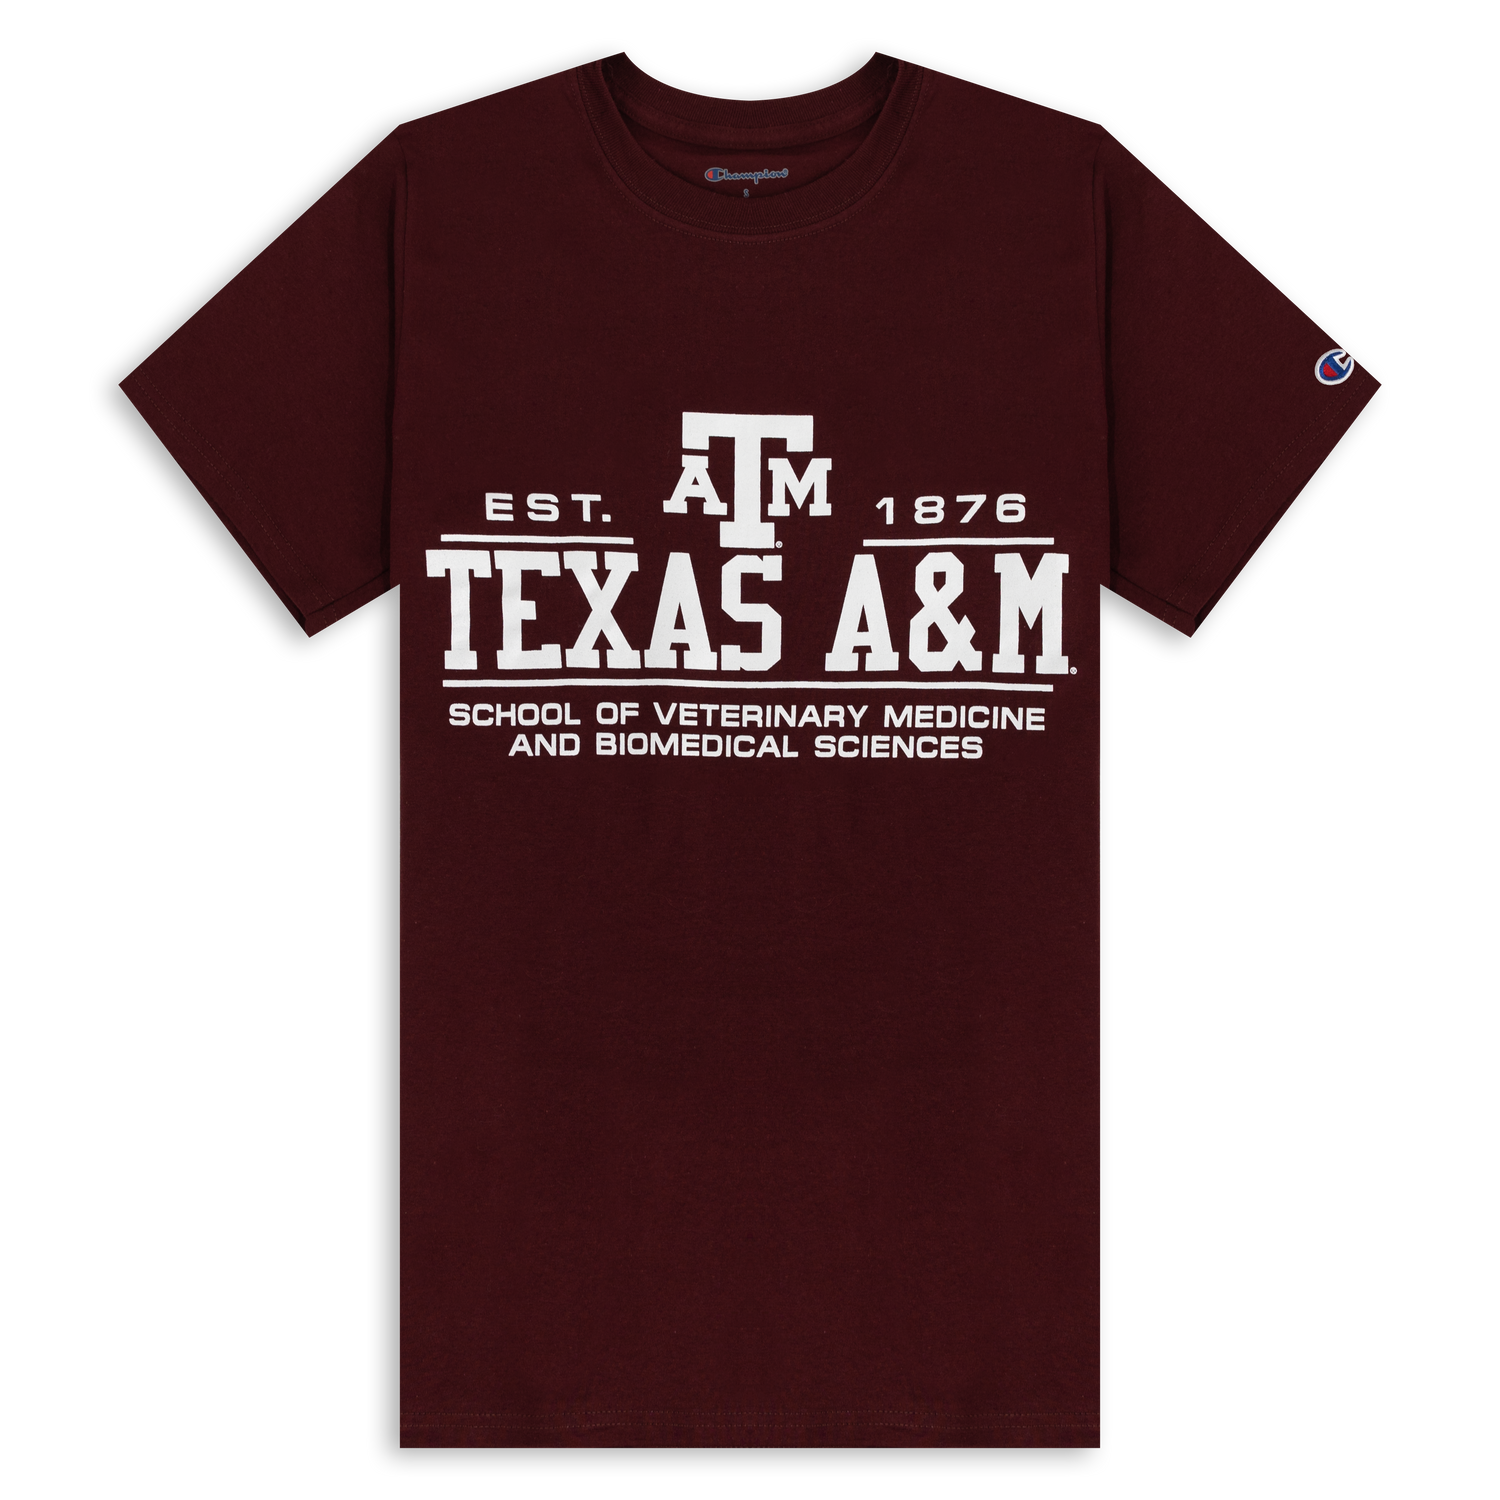 Texas A&M Champion School of Veterinary Medicine and Biomedical Sciences T-Shirt